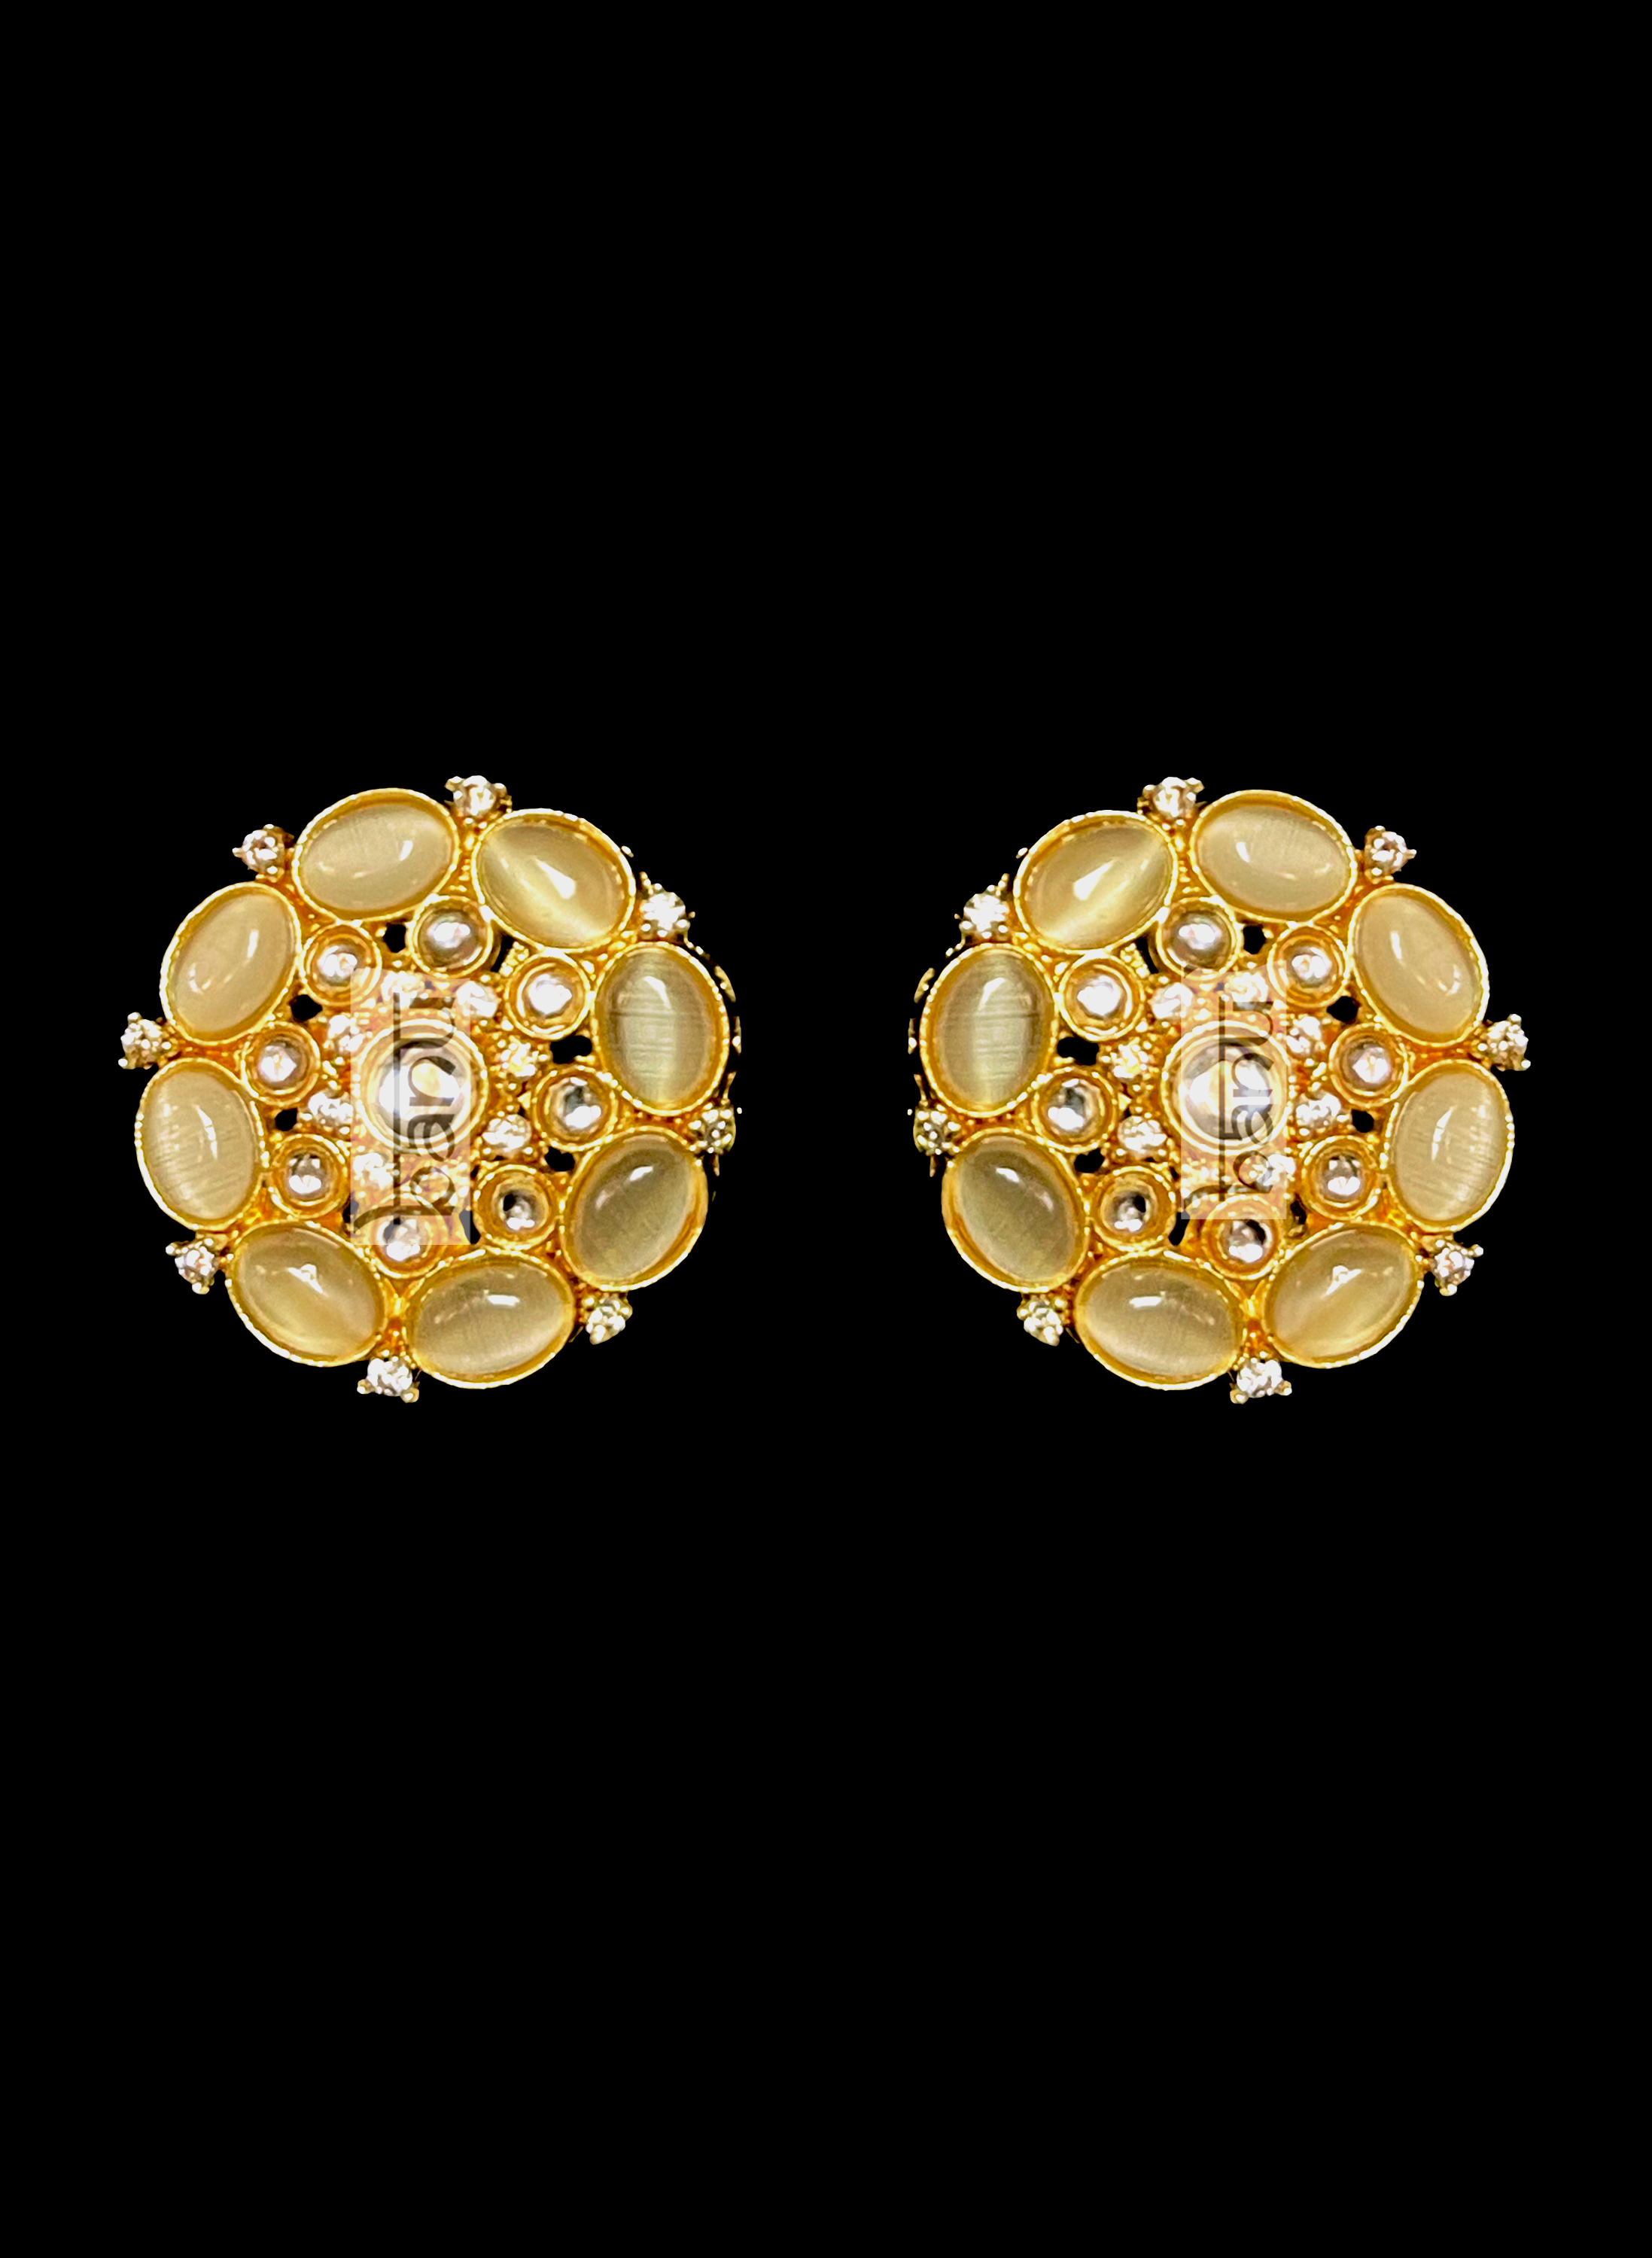 Golden traditional earrings with CZ crystals